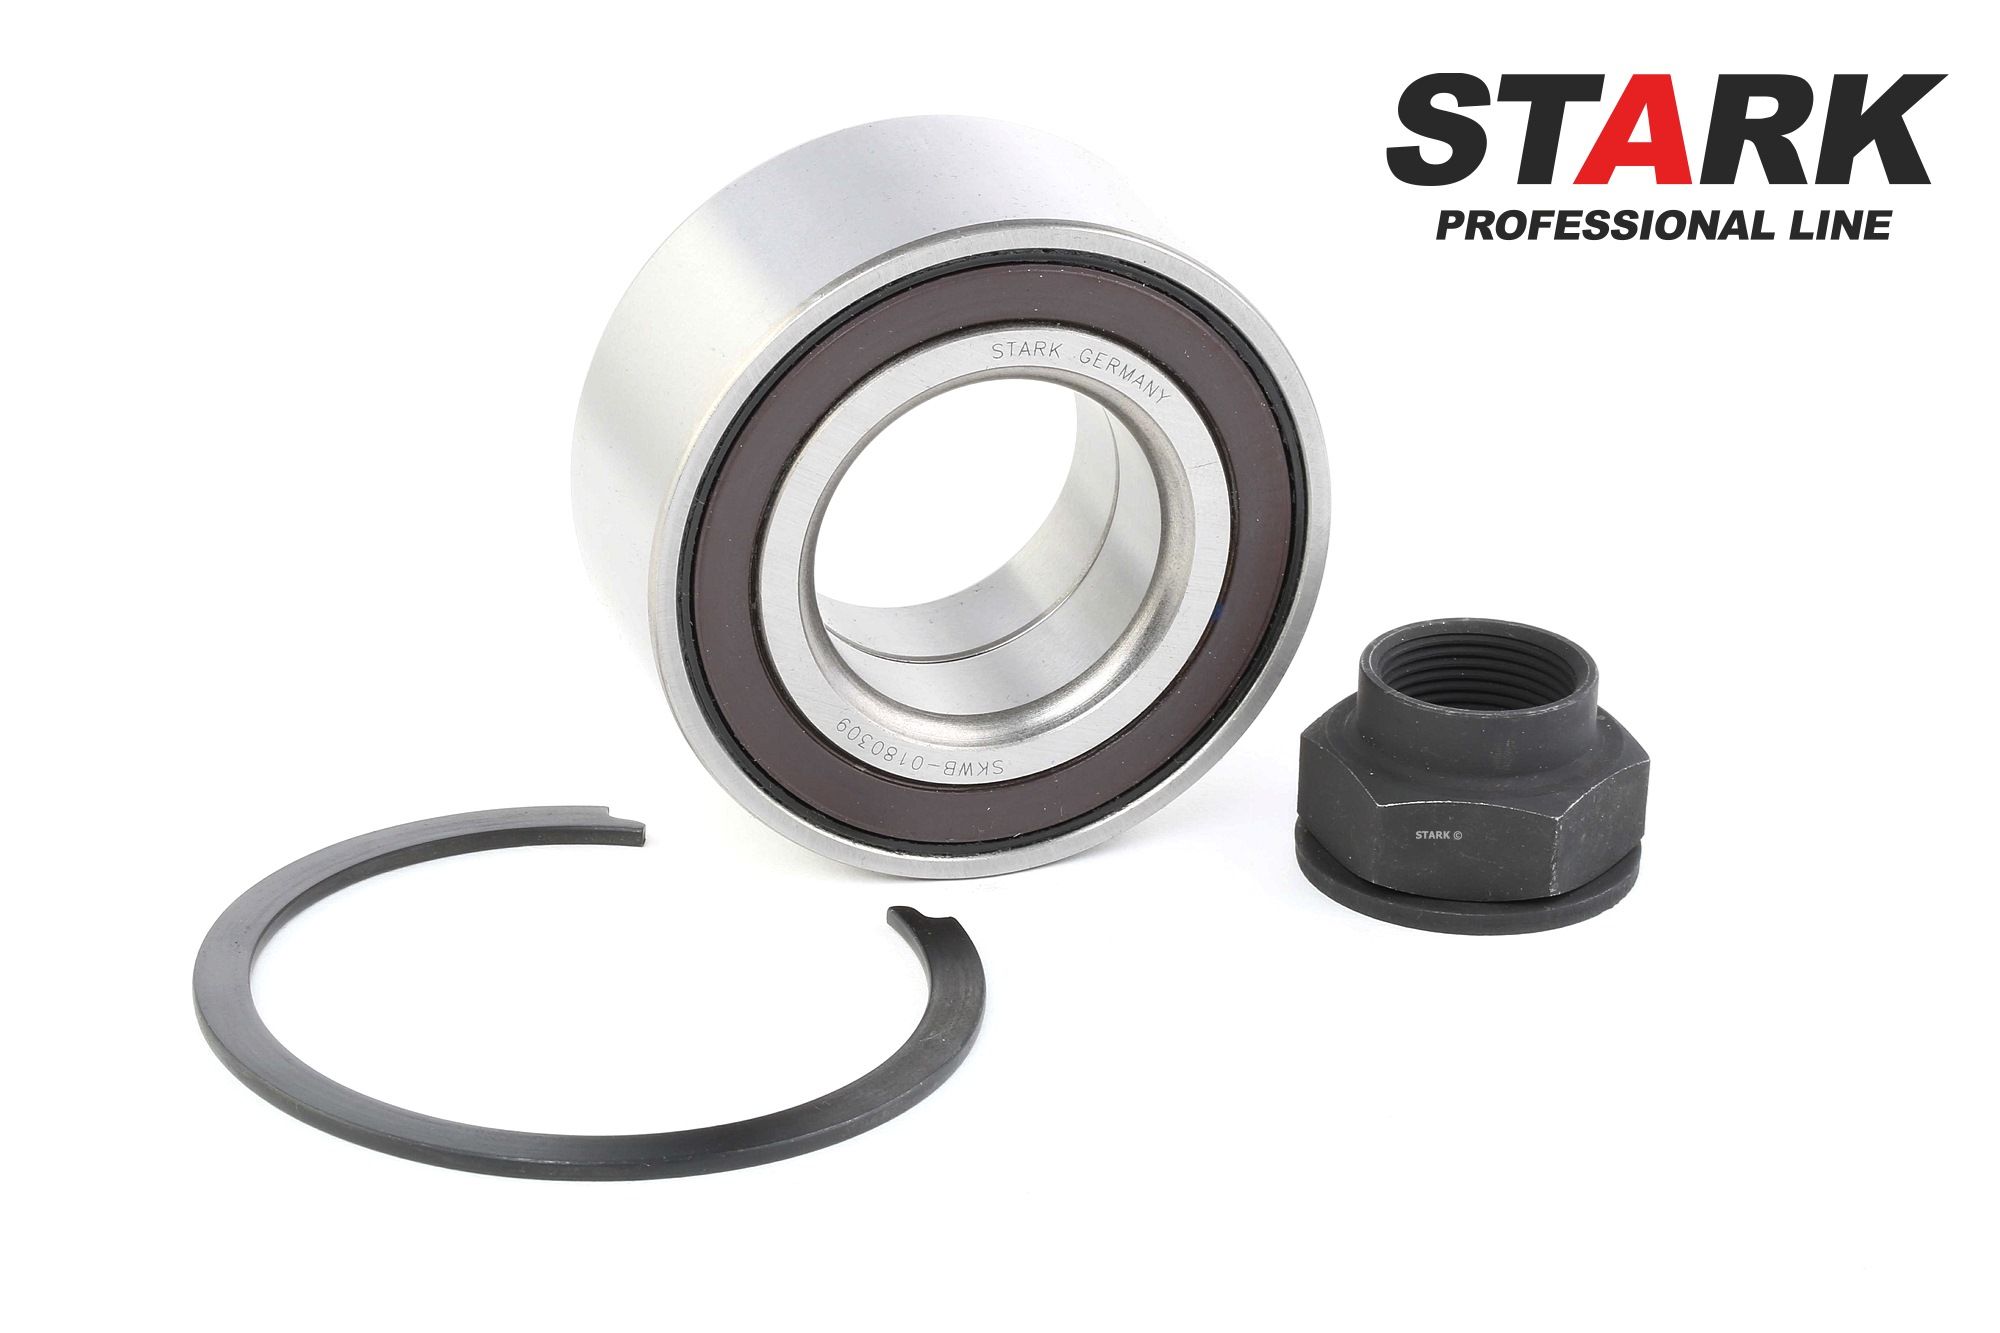 STARK SKWB-0180309 Wheel bearing kit Front axle both sides, with integrated ABS sensor, 82,5 mm